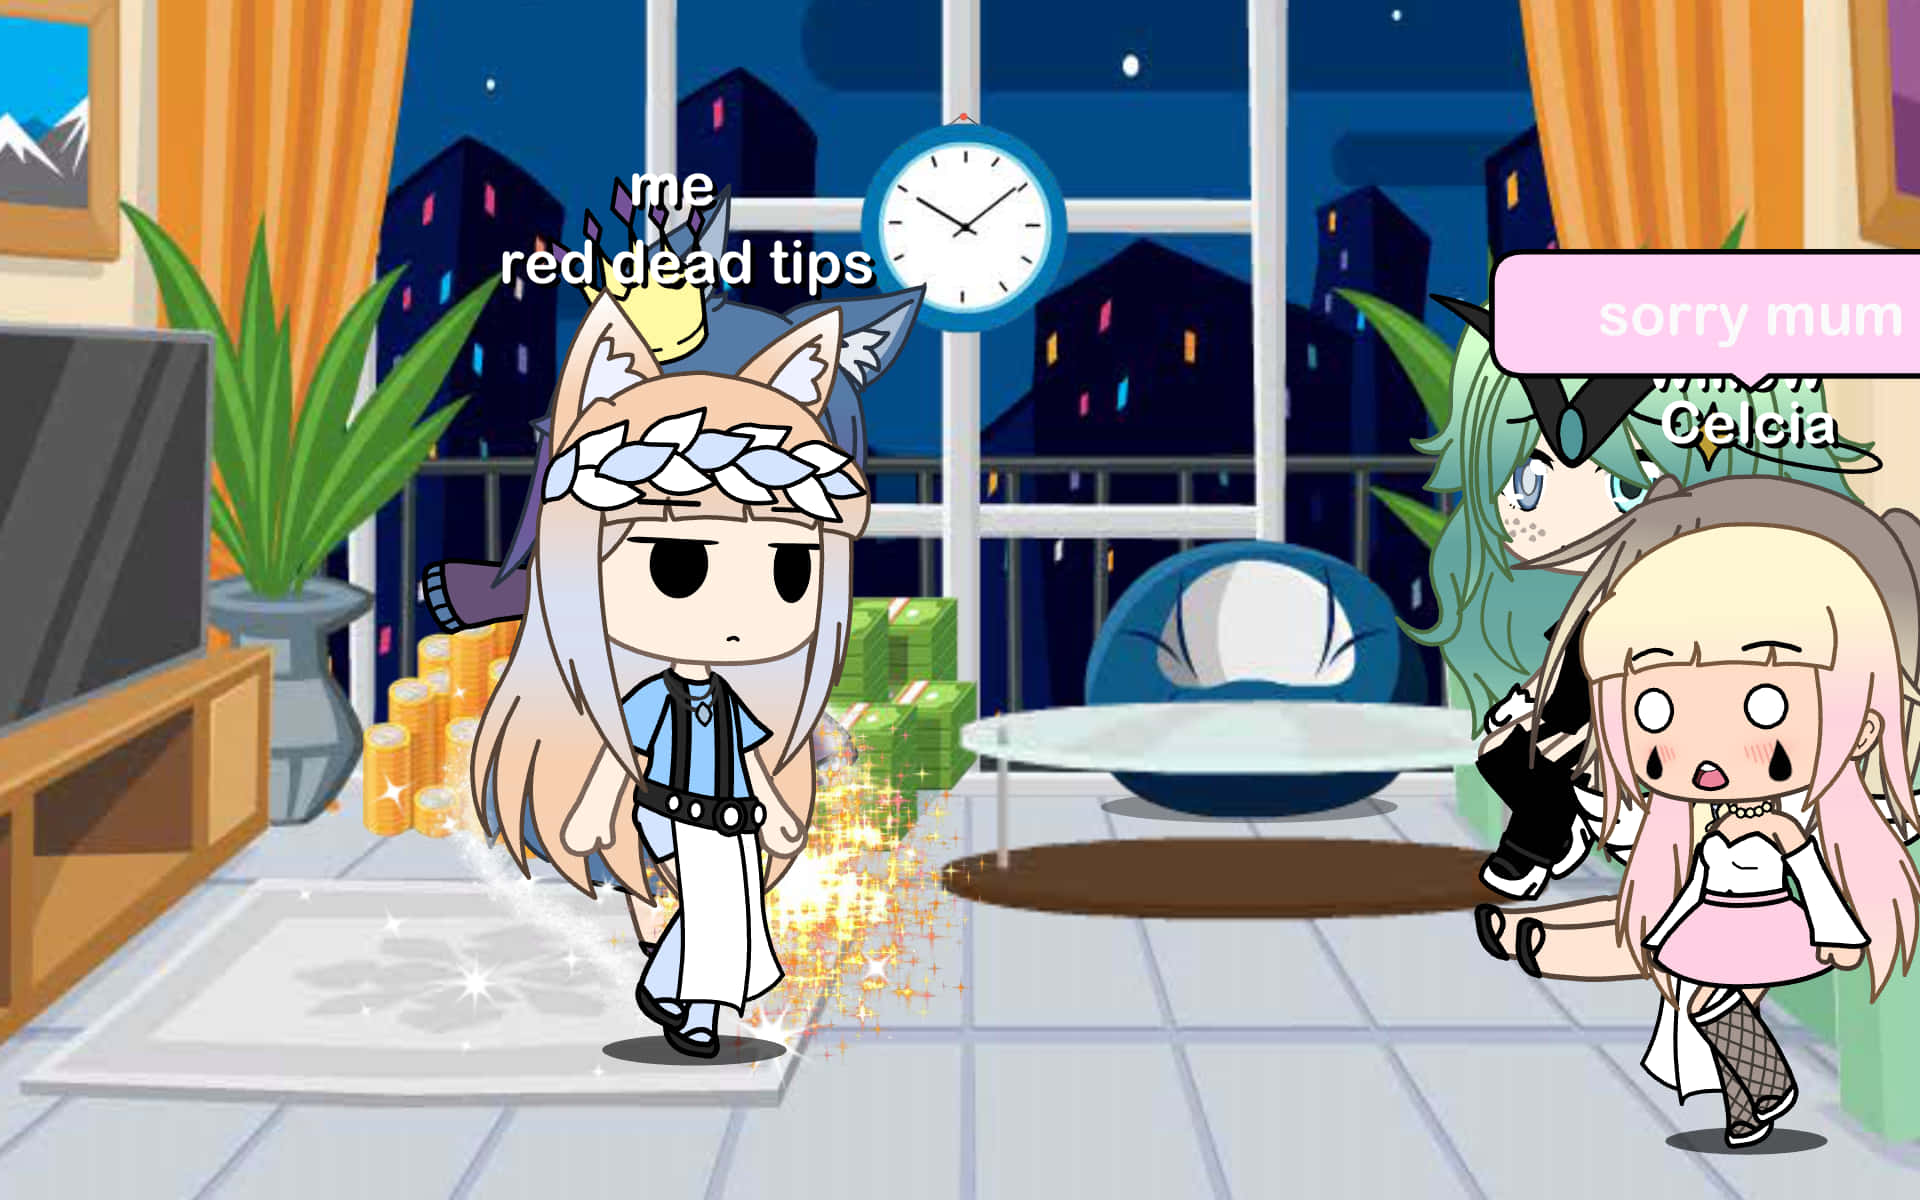 Express Yourself in Gacha Life